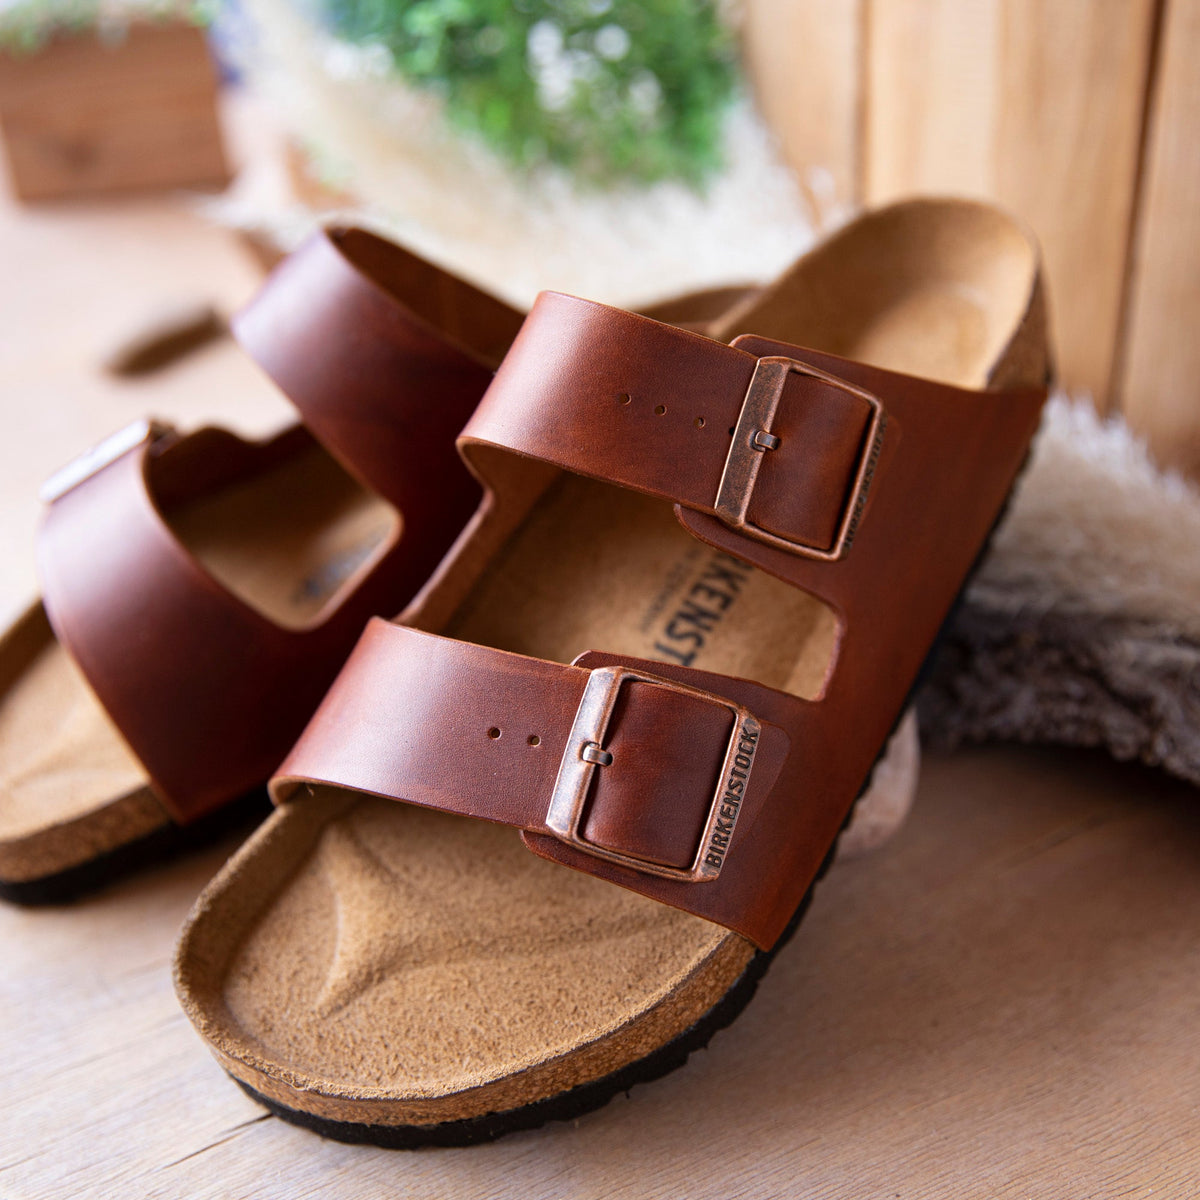 The making our custom Upcycled Birkenstocks… made with